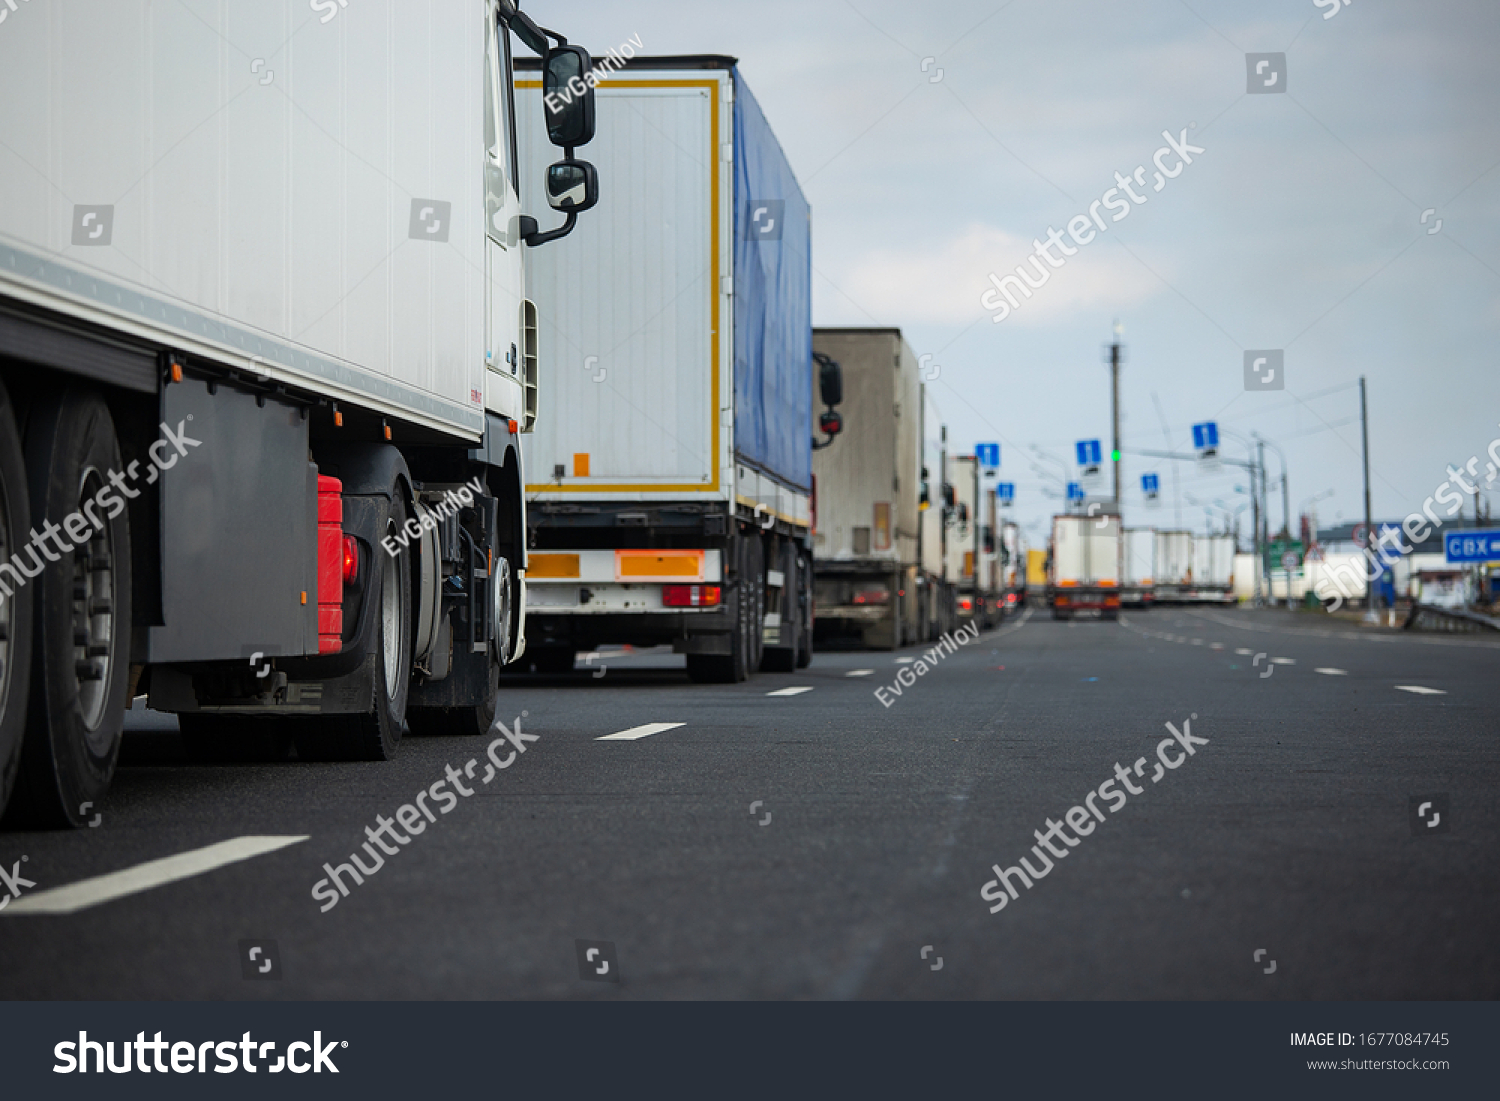 a long traffic jam of many trucks at the border , a long wait for customs checks between States due to the coronavirus epidemic, increased sanitary inspection of cargo transport #1677084745